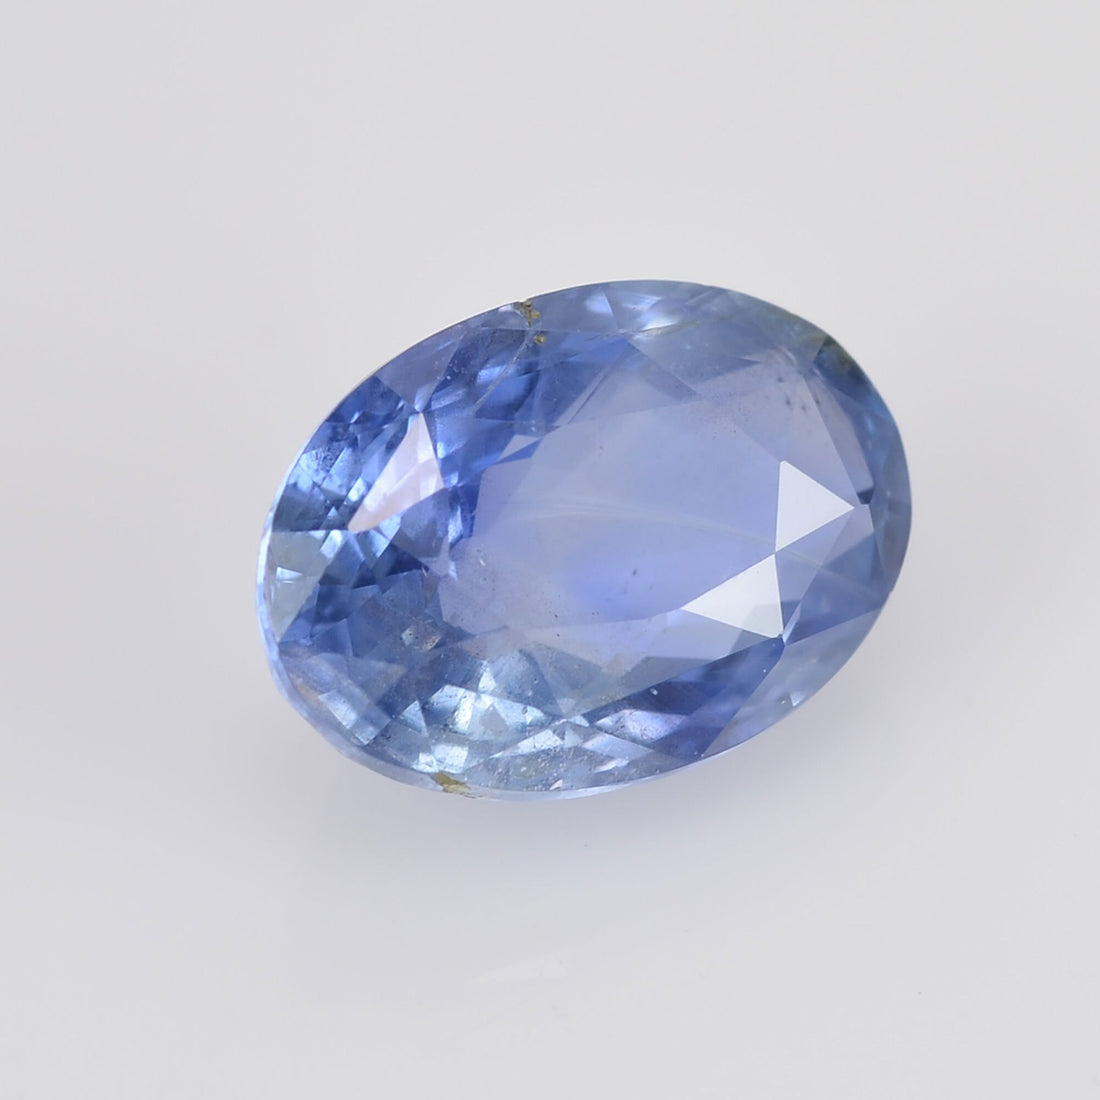 2.92 cts Unheated Natural Blue Sapphire Loose Gemstone Oval Cut Certified